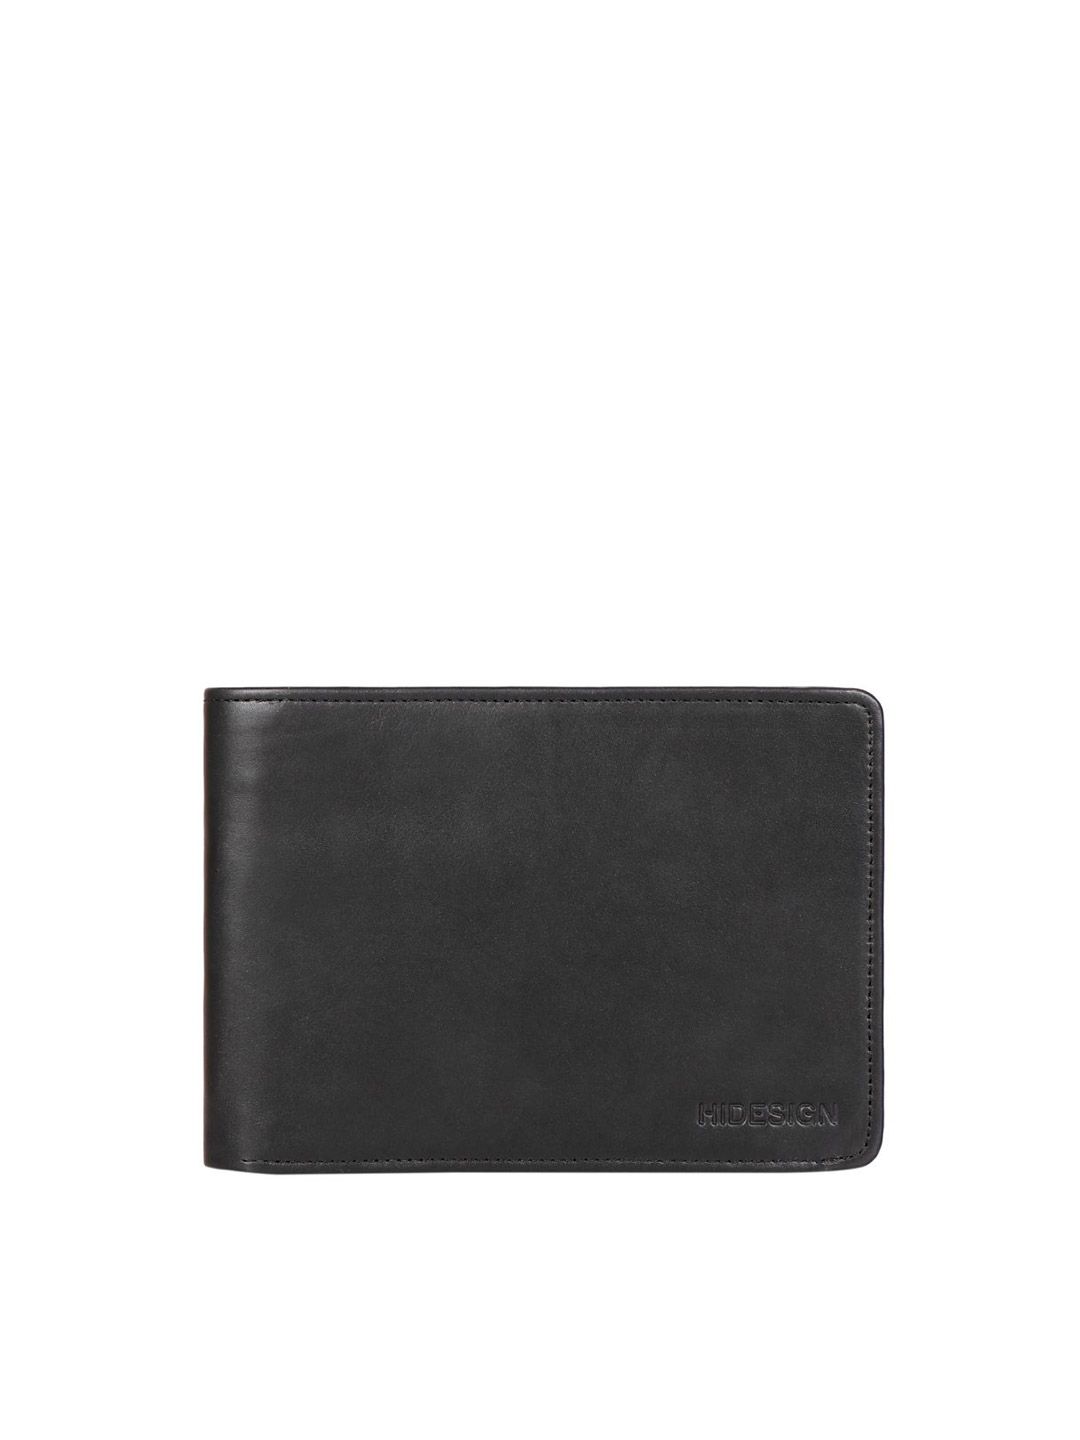 Hidesign Women Black Leather Two Fold Wallet Price in India